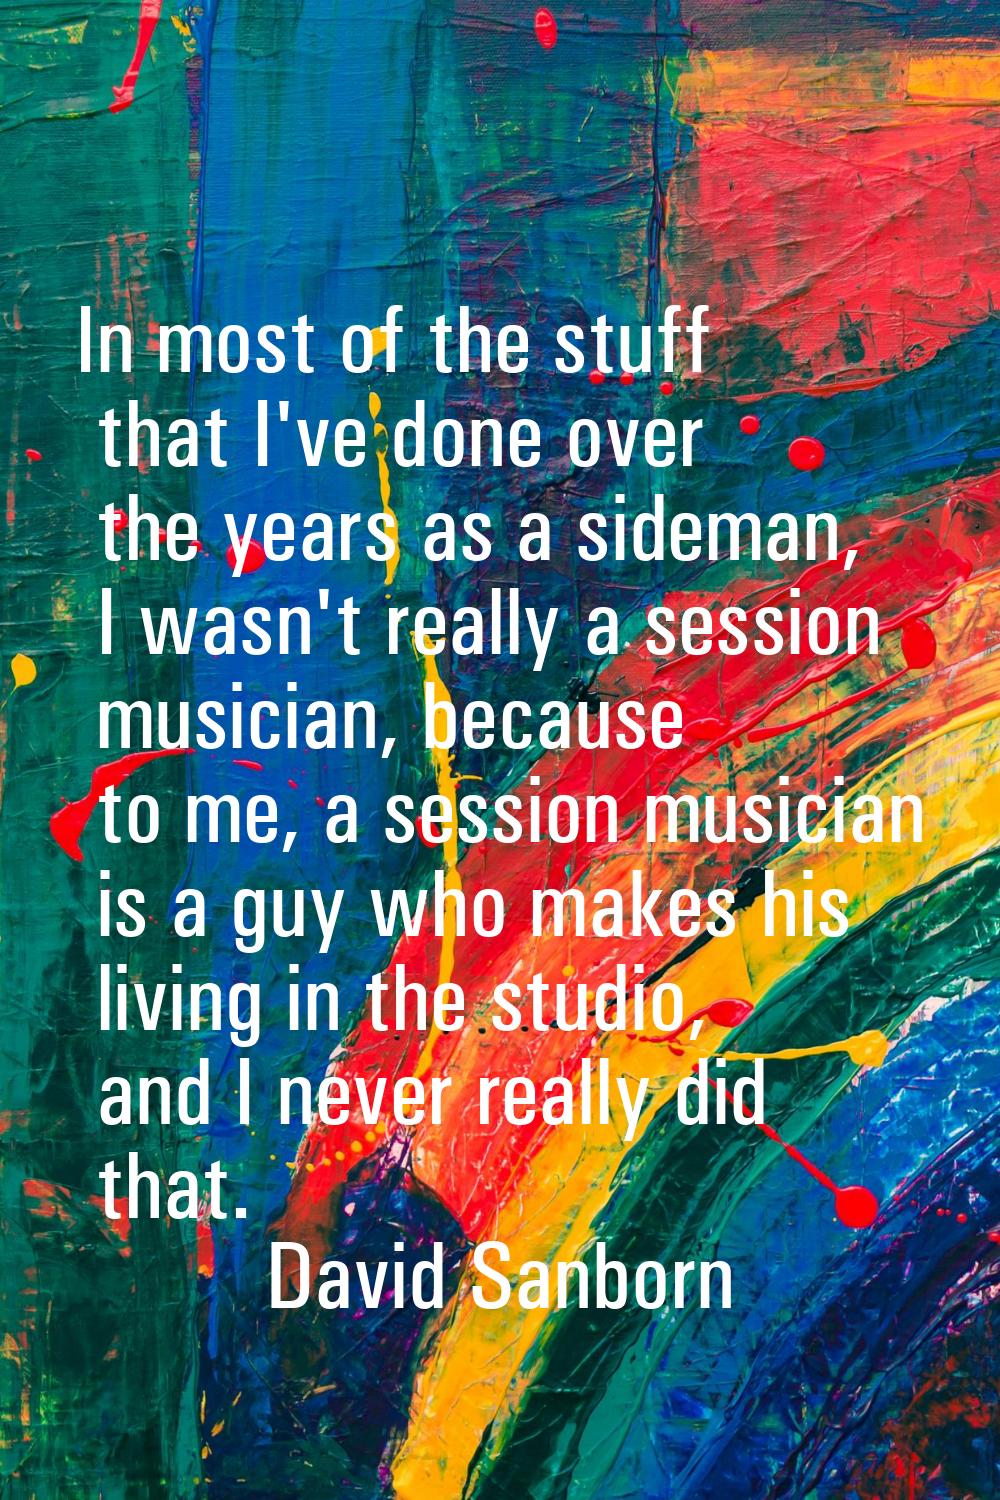 In most of the stuff that I've done over the years as a sideman, I wasn't really a session musician